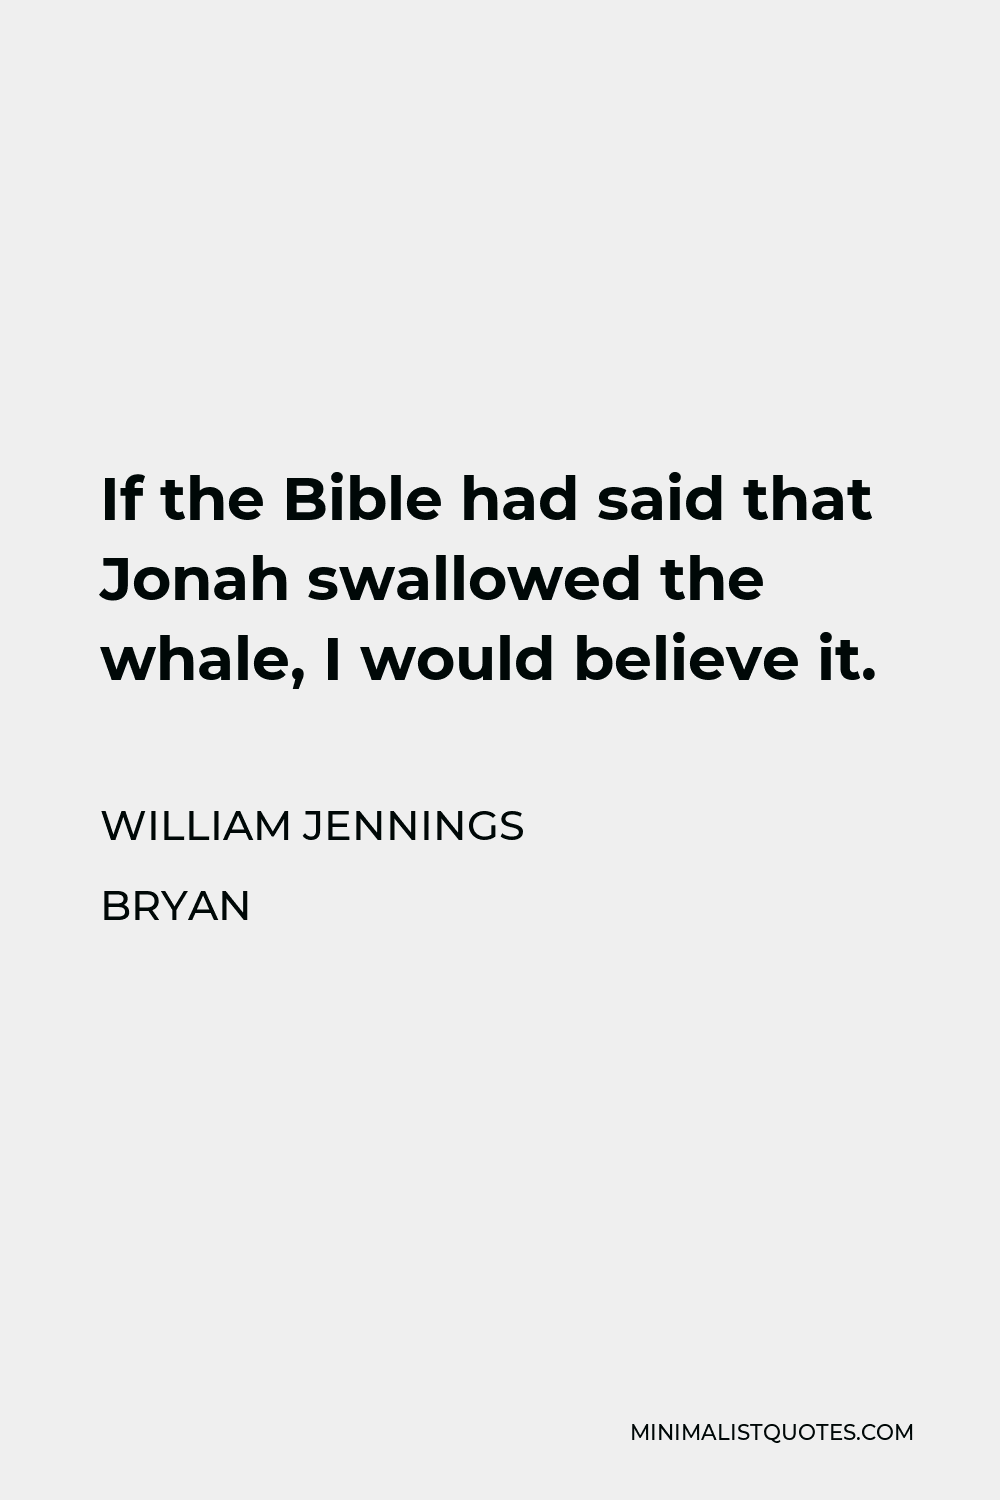 William Jennings Bryan Quote - If the Bible had said that Jonah swallowed the whale, I would believe it.